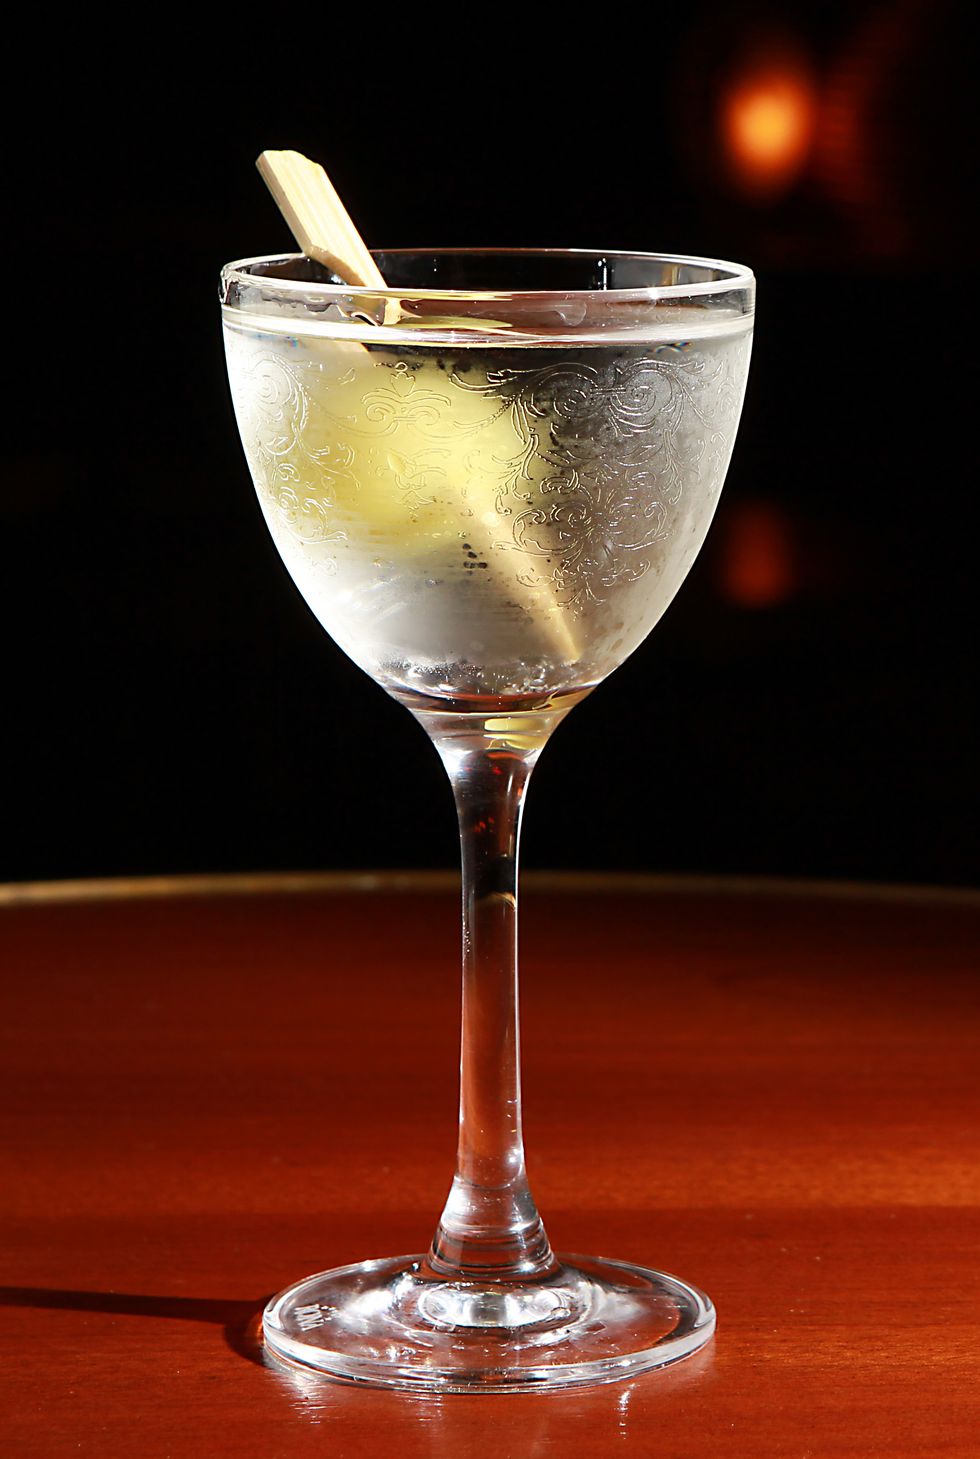 Drink, Classic cocktail, Alcoholic beverage, Champagne cocktail, Martini glass, Stemware, Cocktail, Distilled beverage, Champagne stemware, Wine cocktail, 